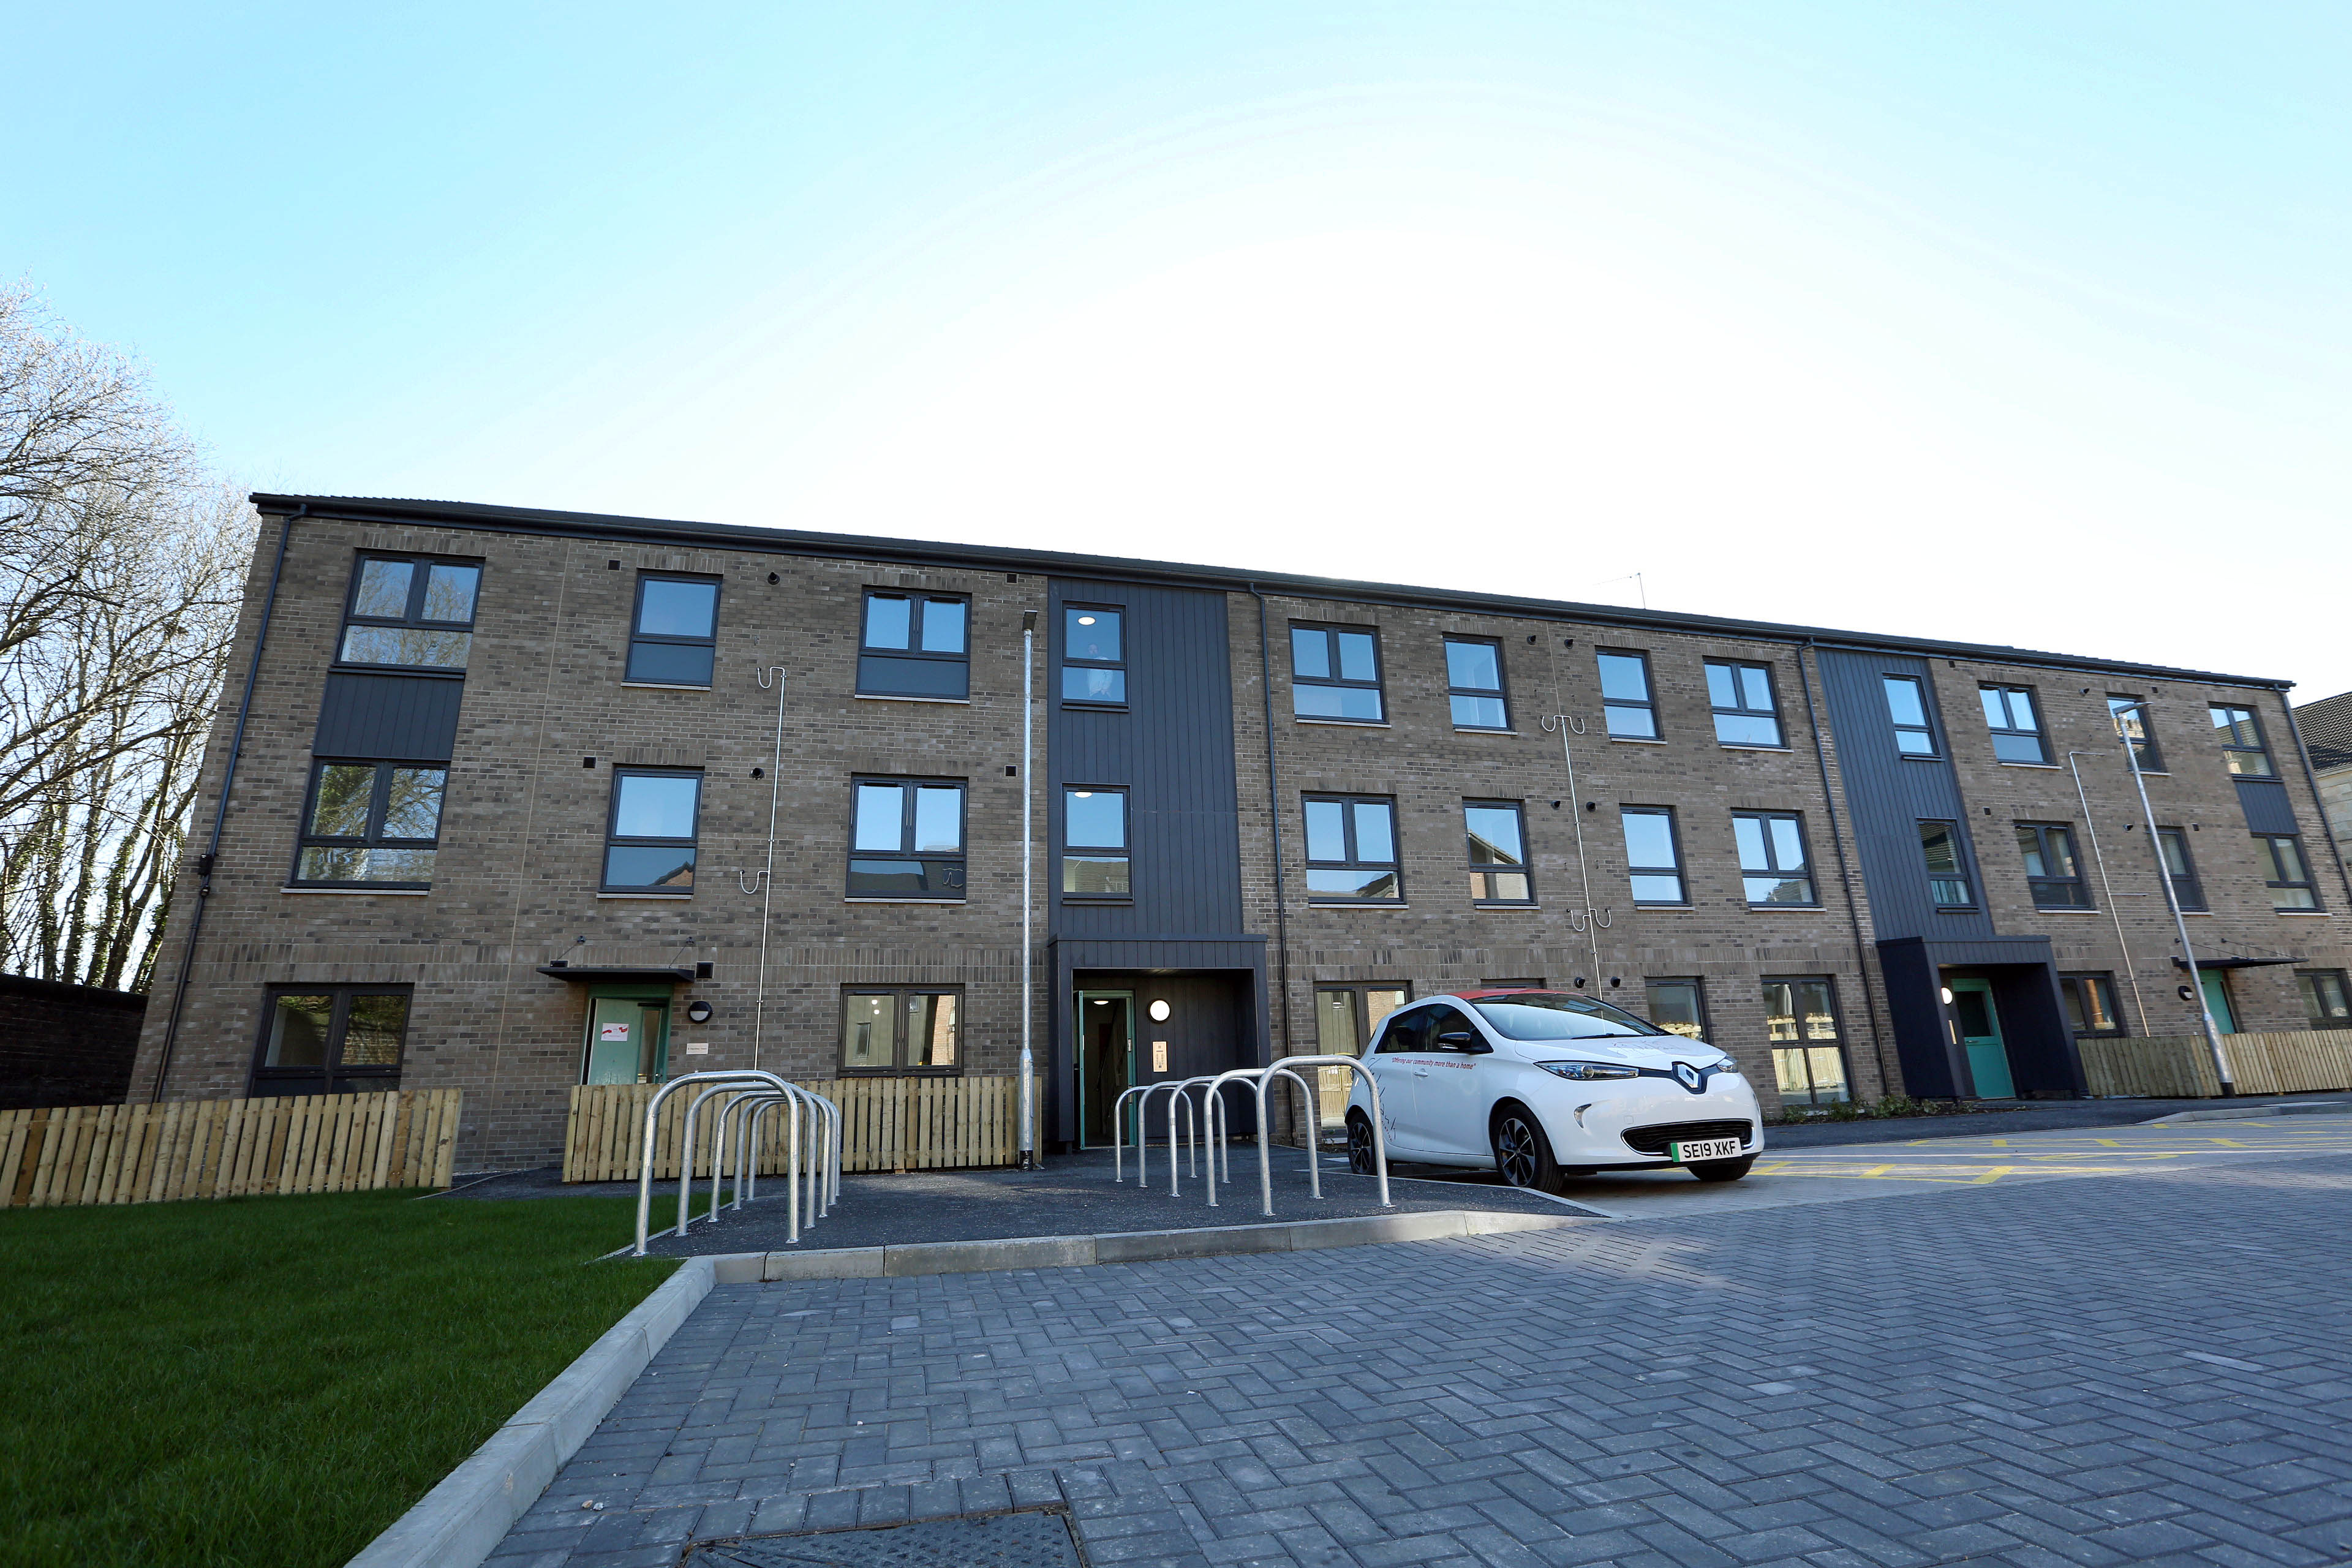 Clydebank residents 'bowled over' by new homes